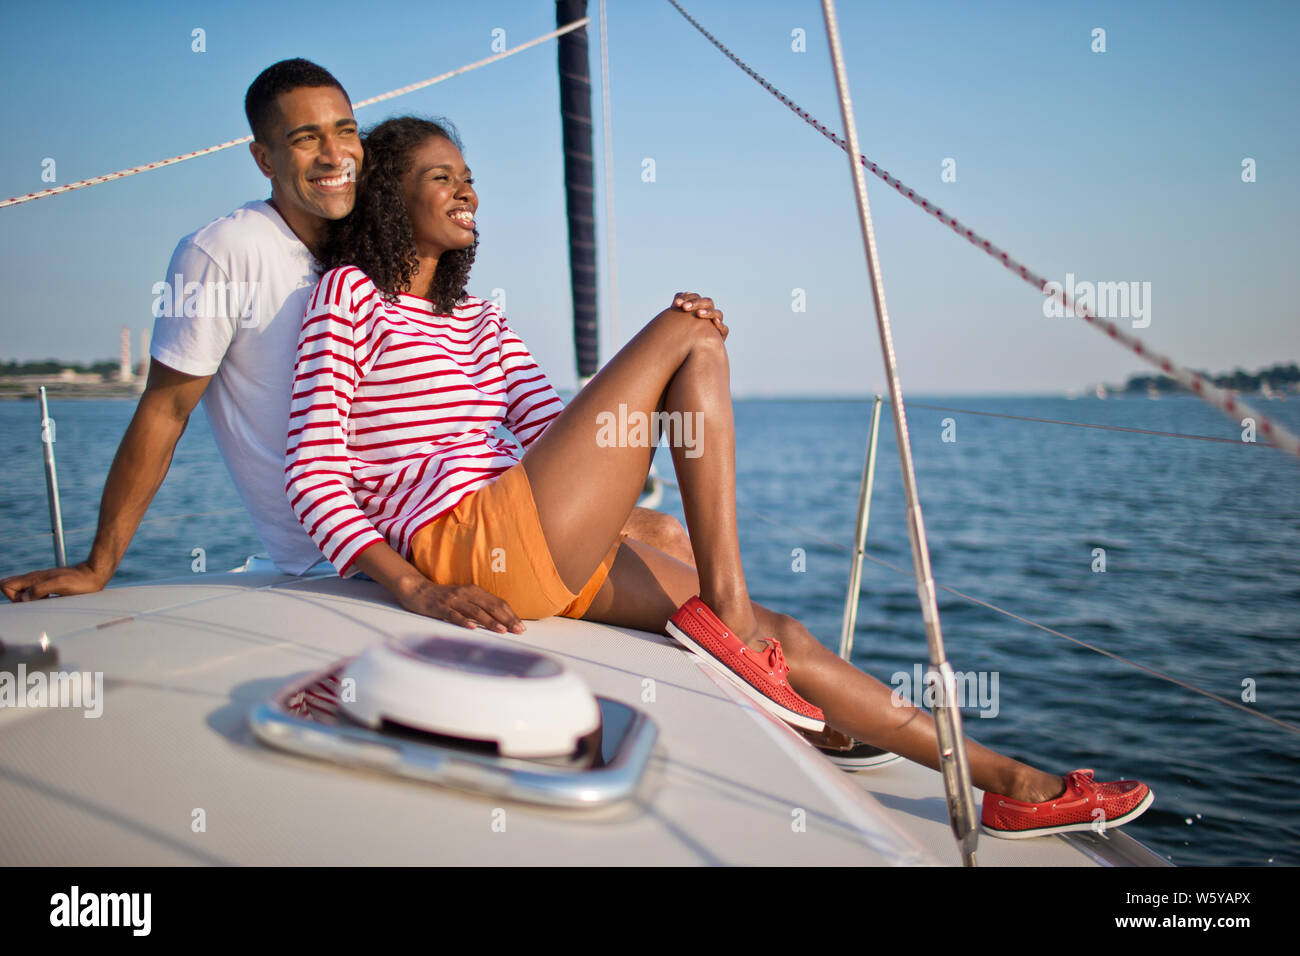 Happy young couple relaxing and having fun while sailing. Stock Photo